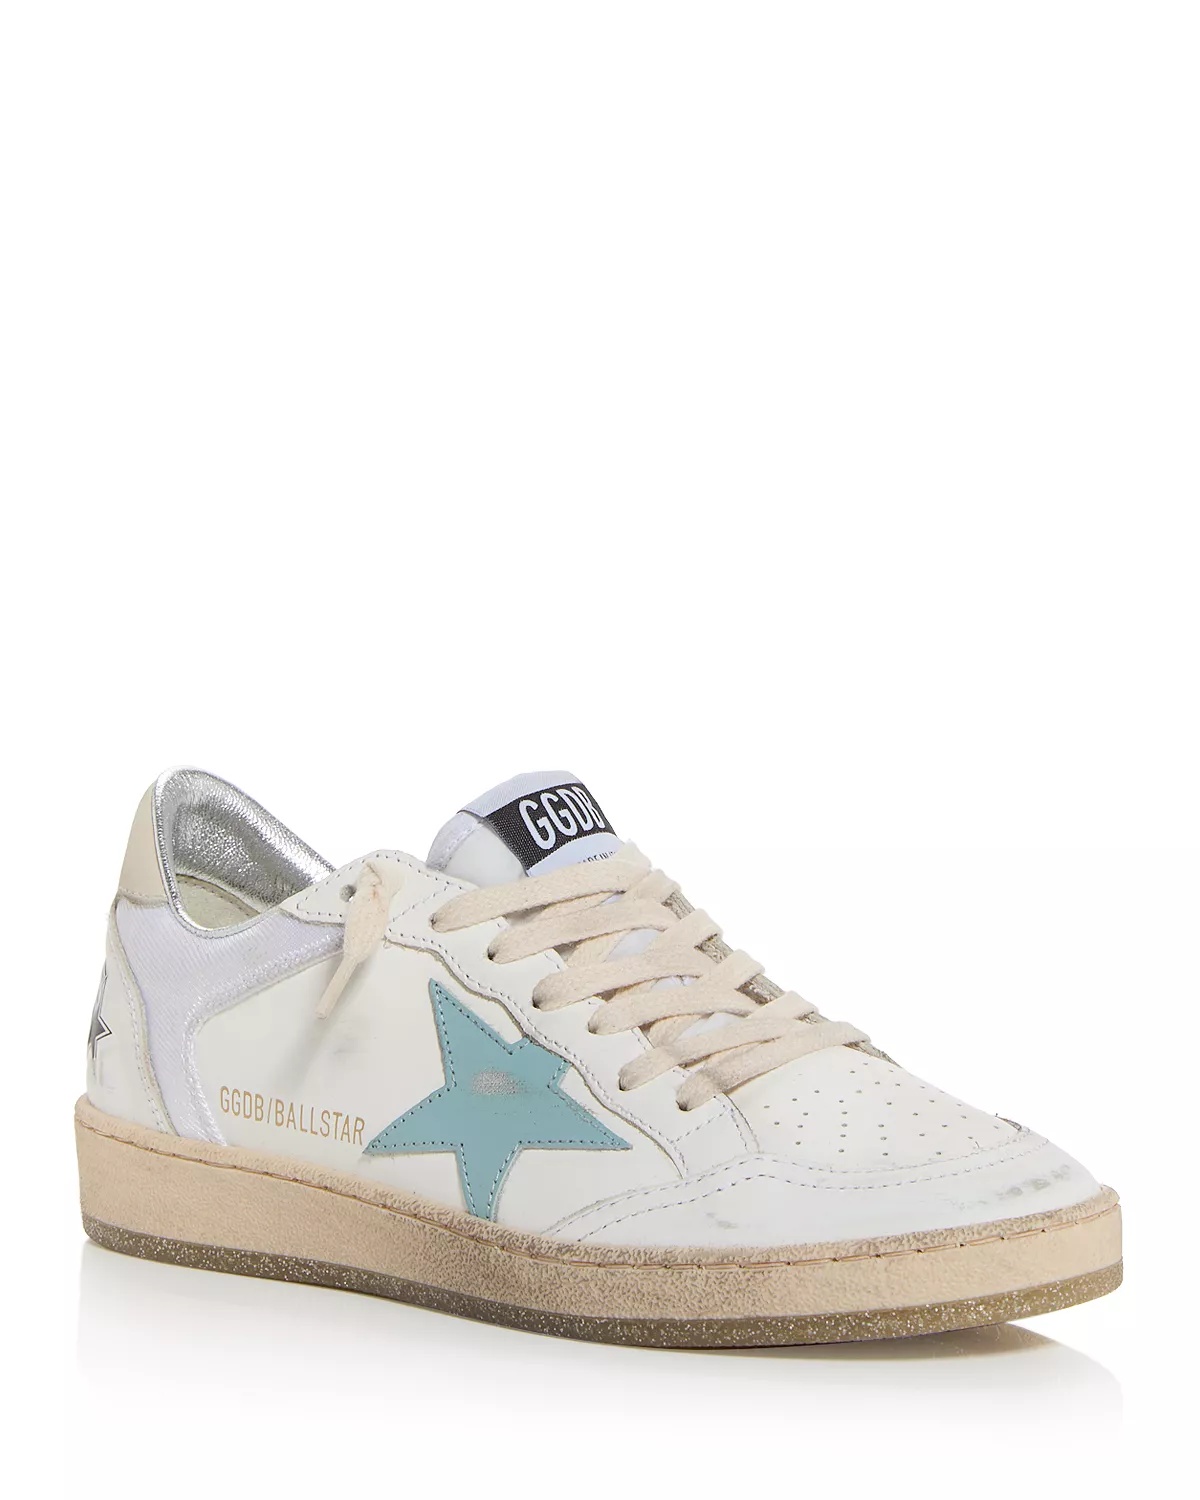 Women's Ball Star Lace Up Low Top Sneakers - 1